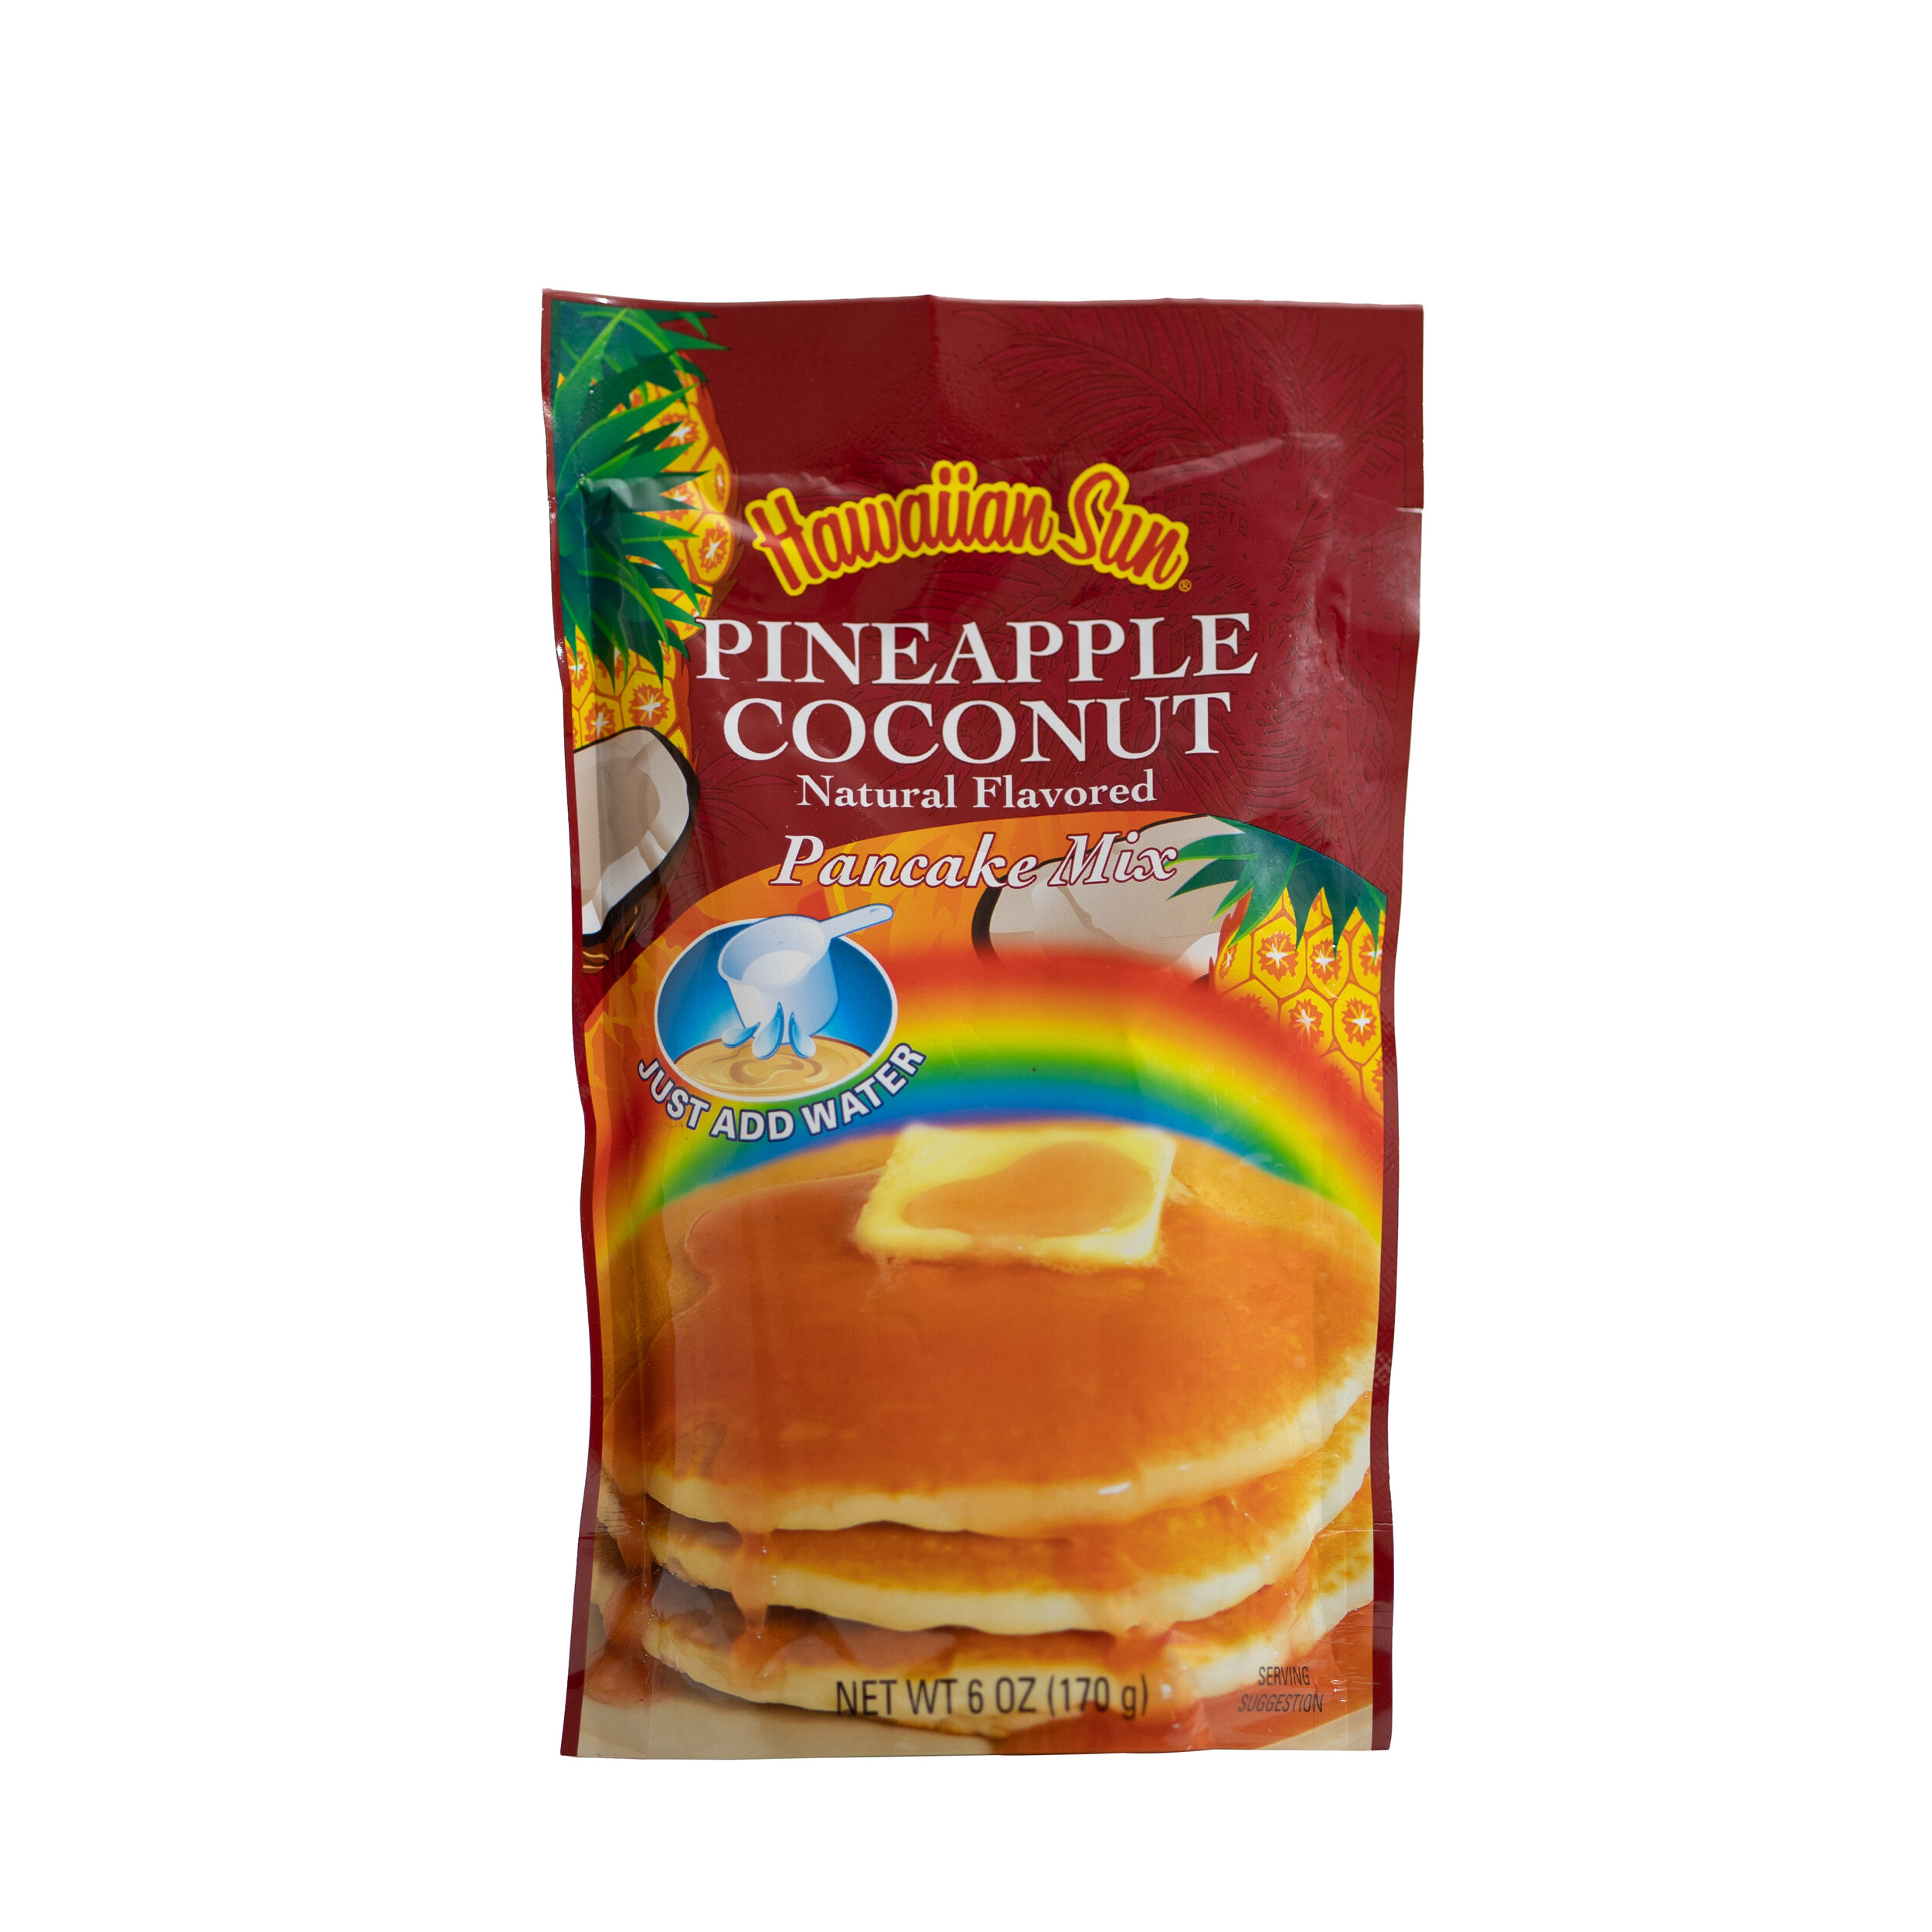 Pineapple Coconut Flavored Pancake Mix